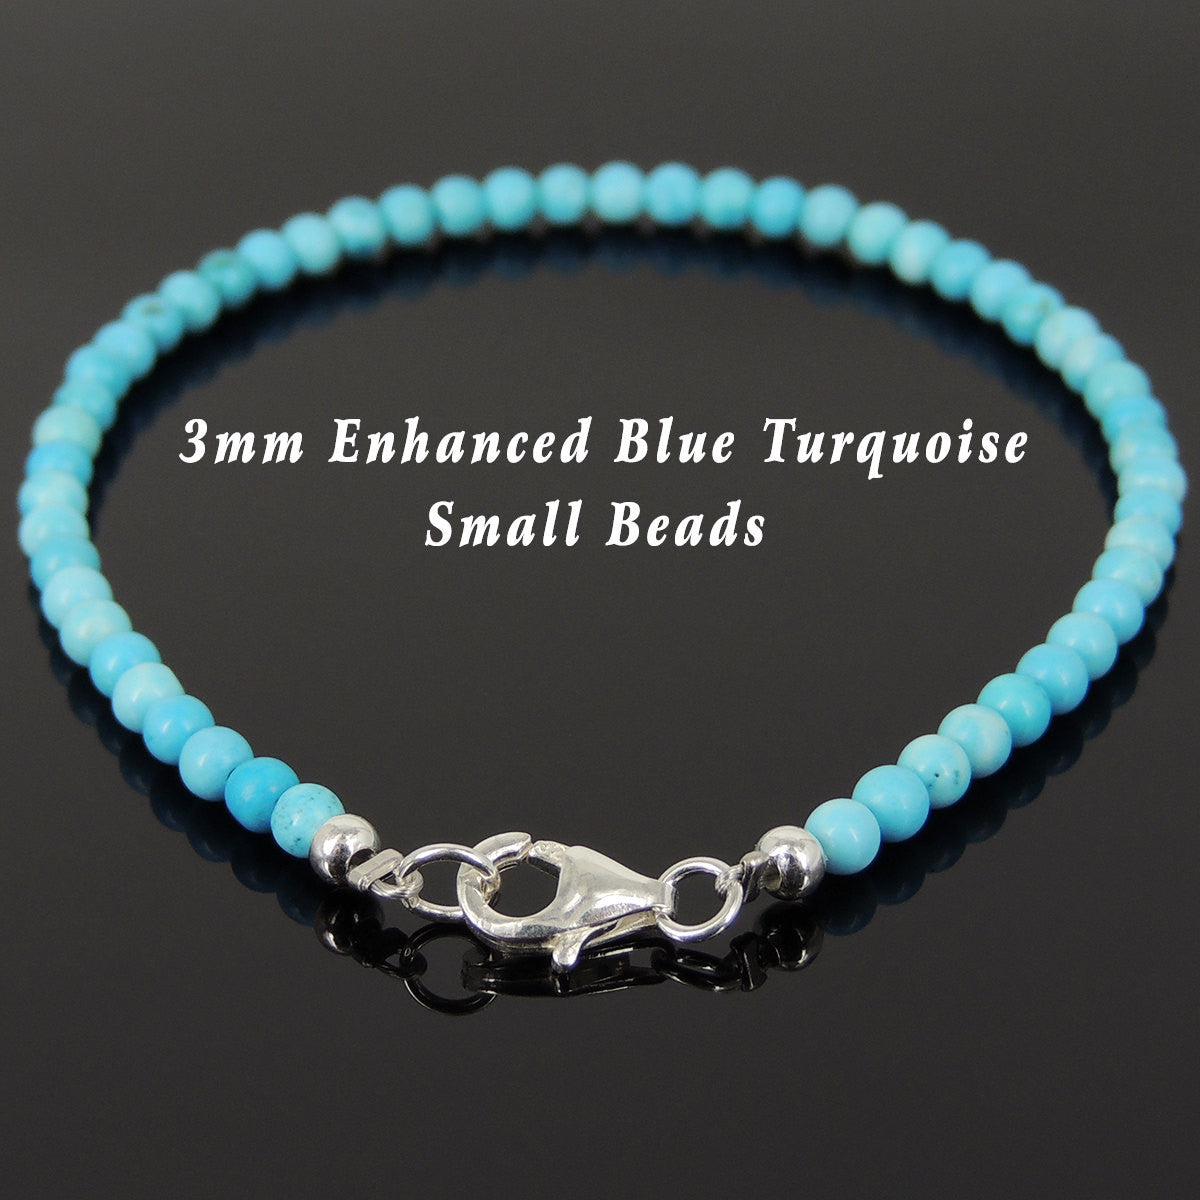 3mm Enhanced Turquoise Healing Gemstone Bracelet with S925 Sterling Silver Spacer Beads & Clasp - Handmade by Gem & Silver BR876